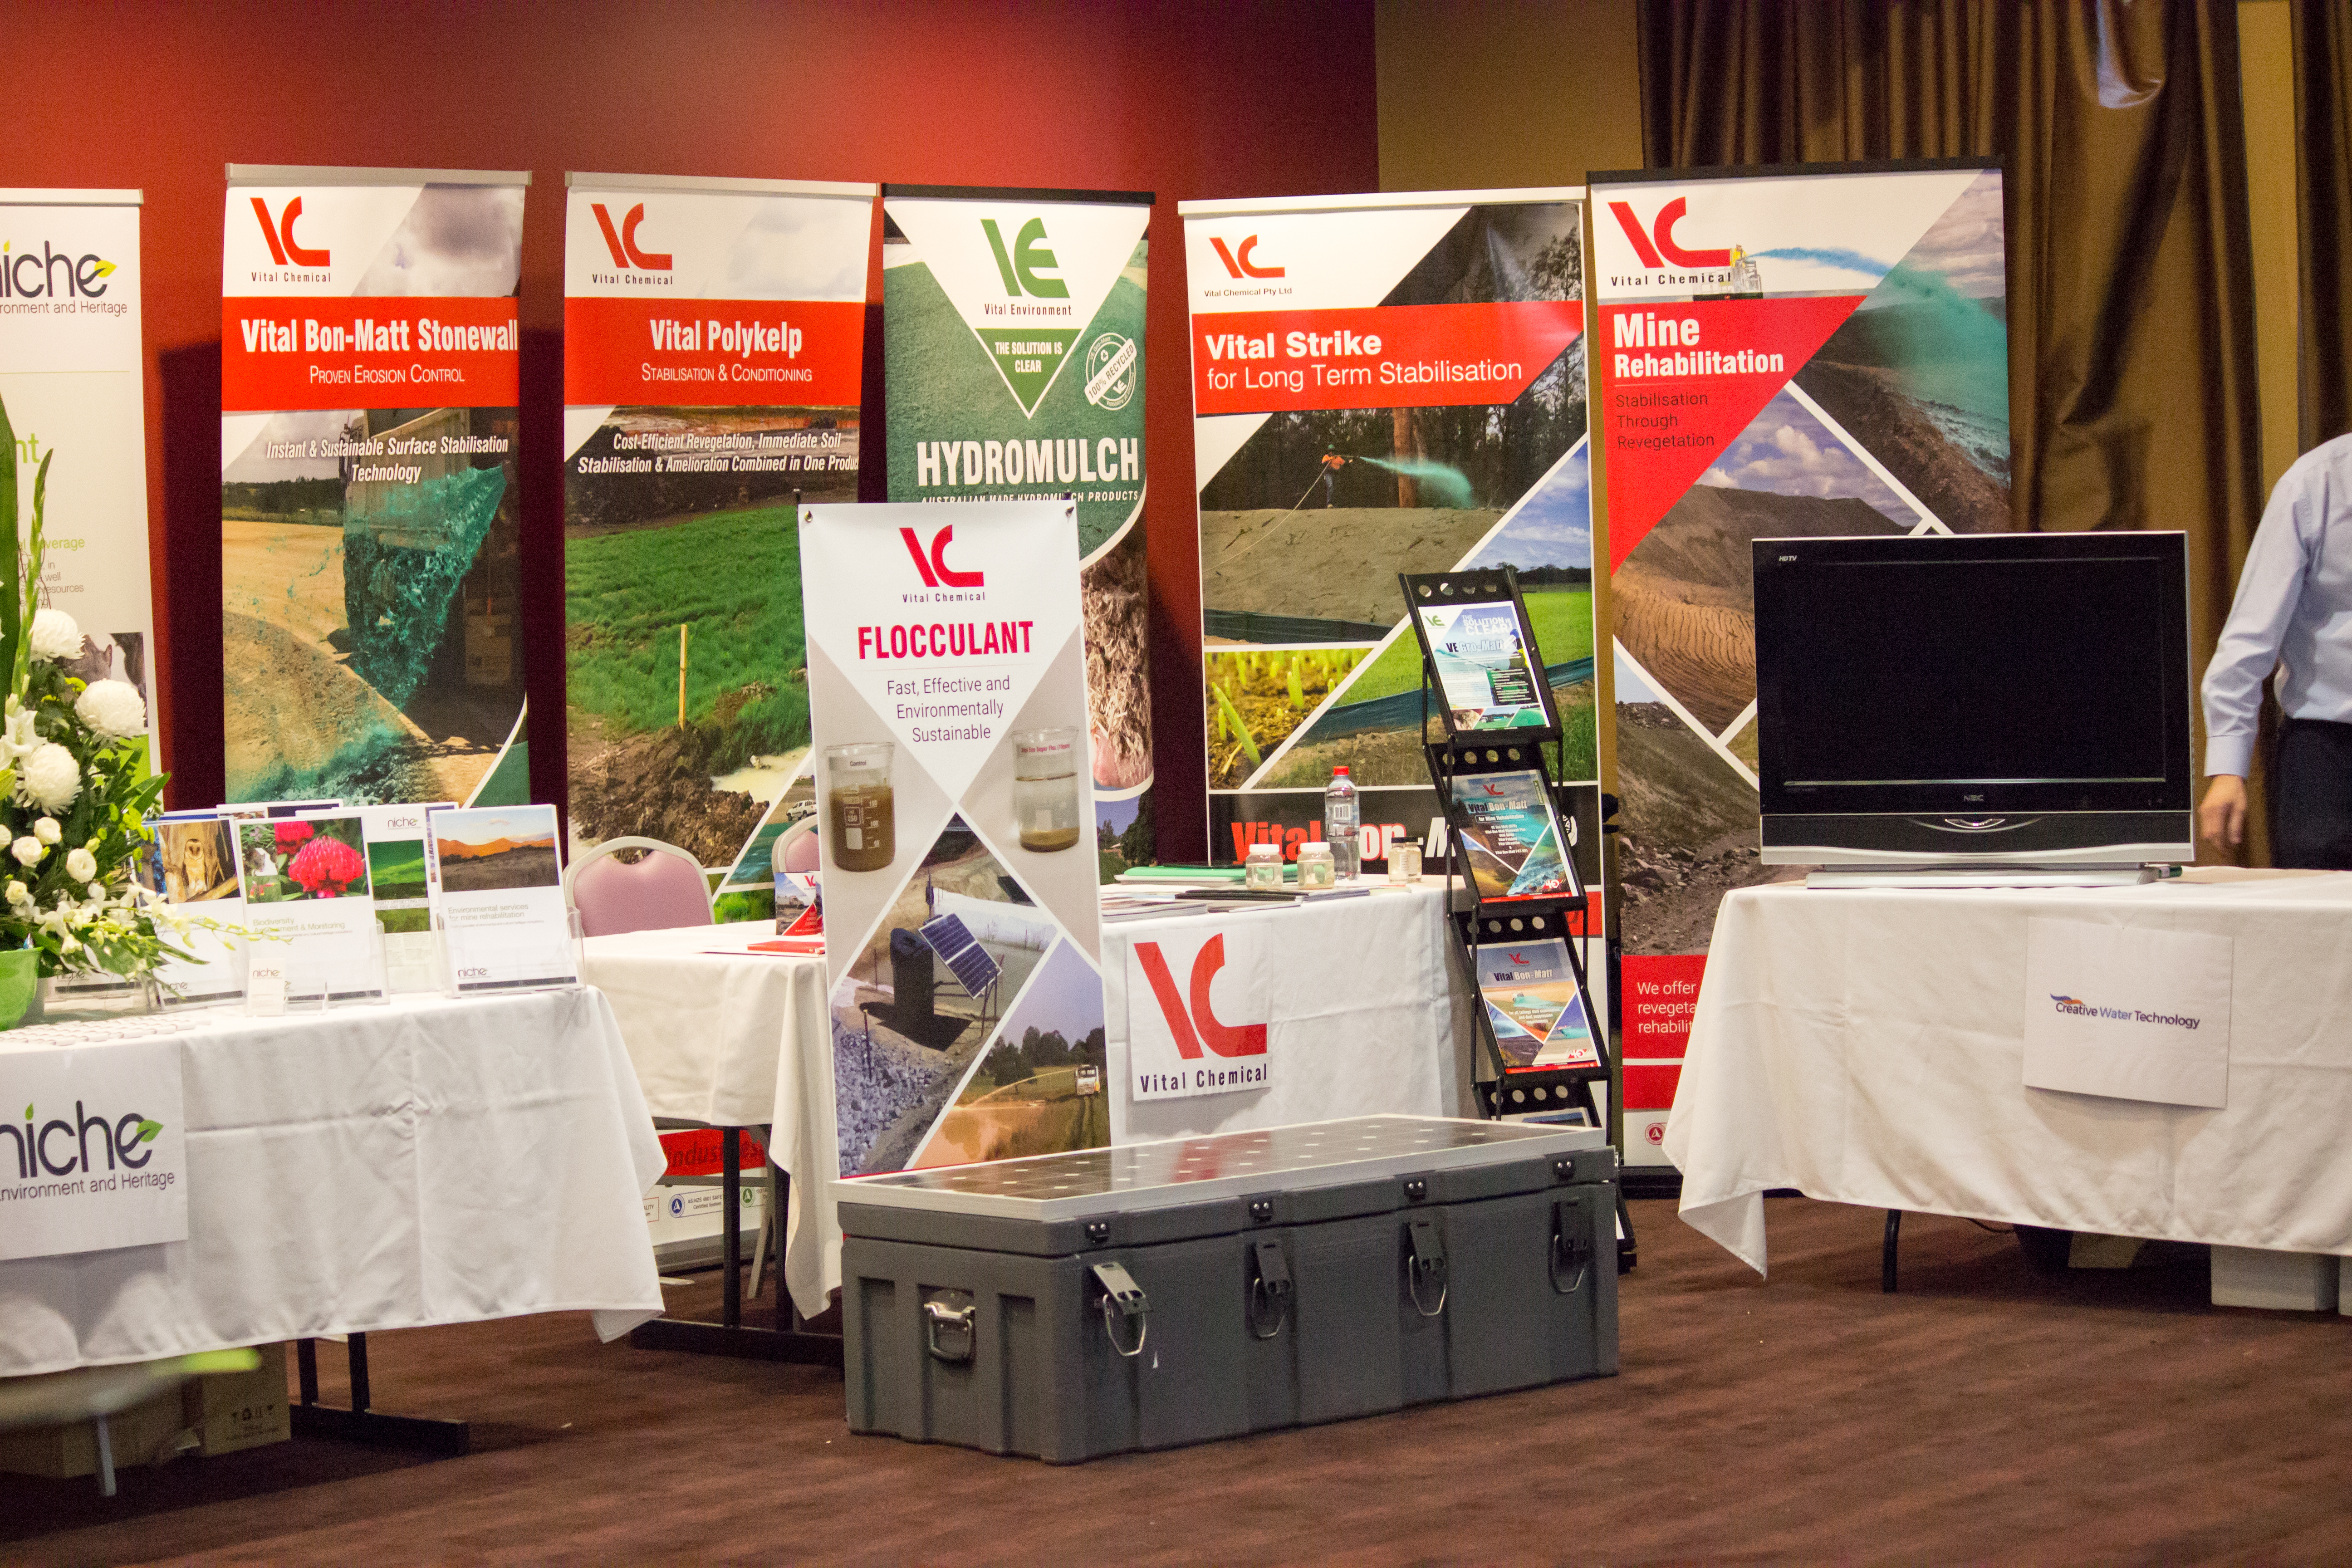 Exhibitor Vital Industries also sponsored the Conference Dinner in 2017